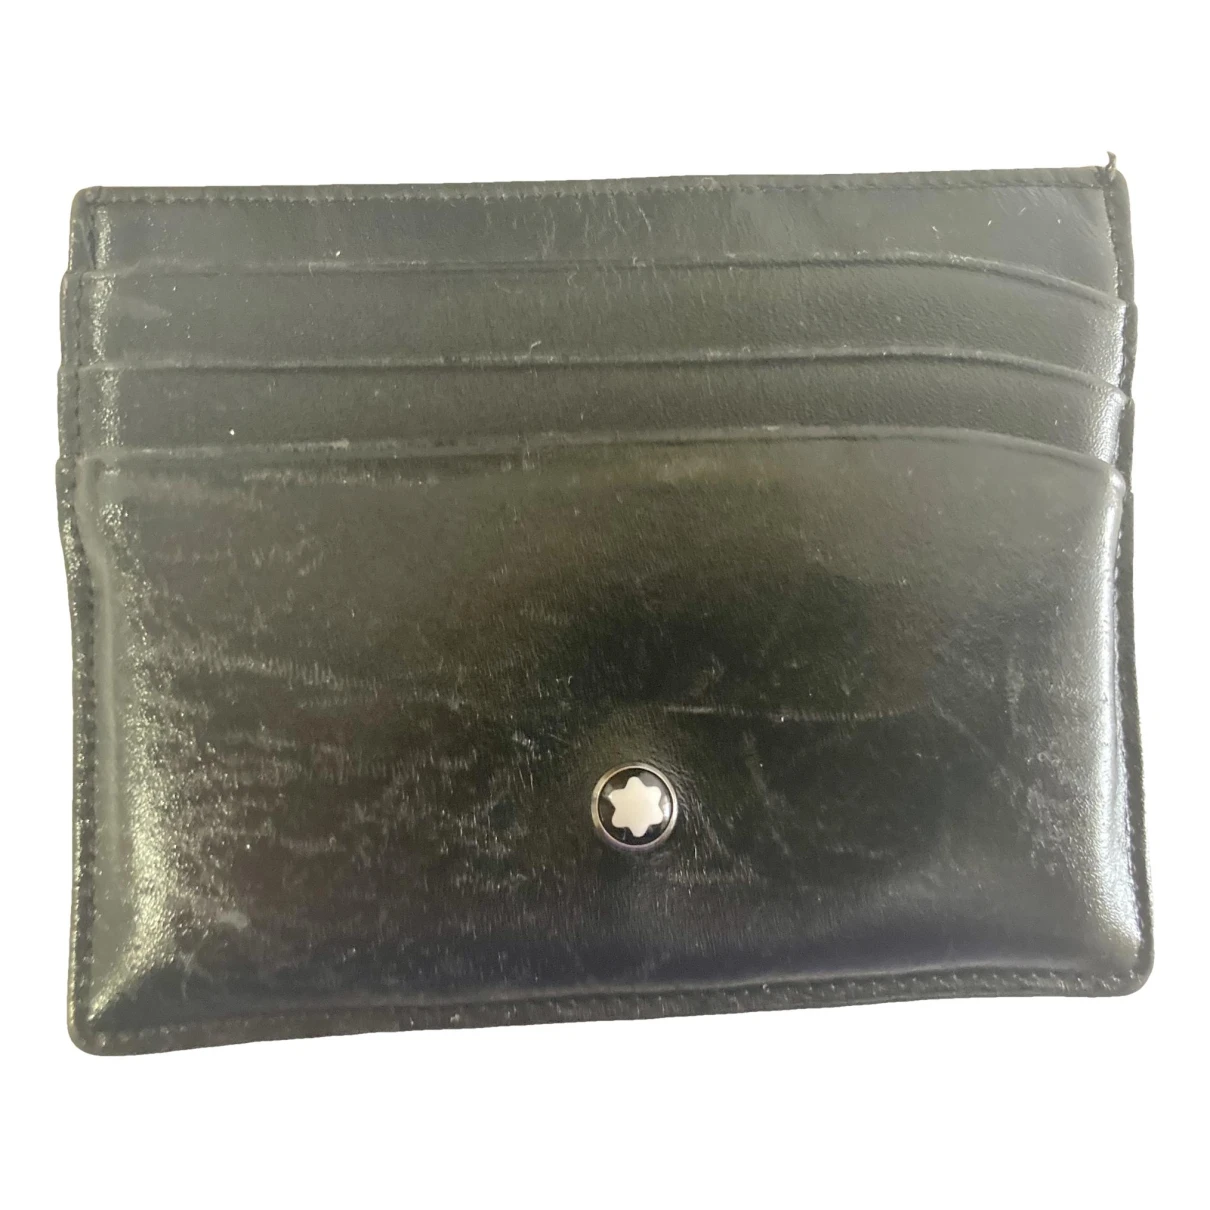 Pre-owned Montblanc Leather Small Bag In Black